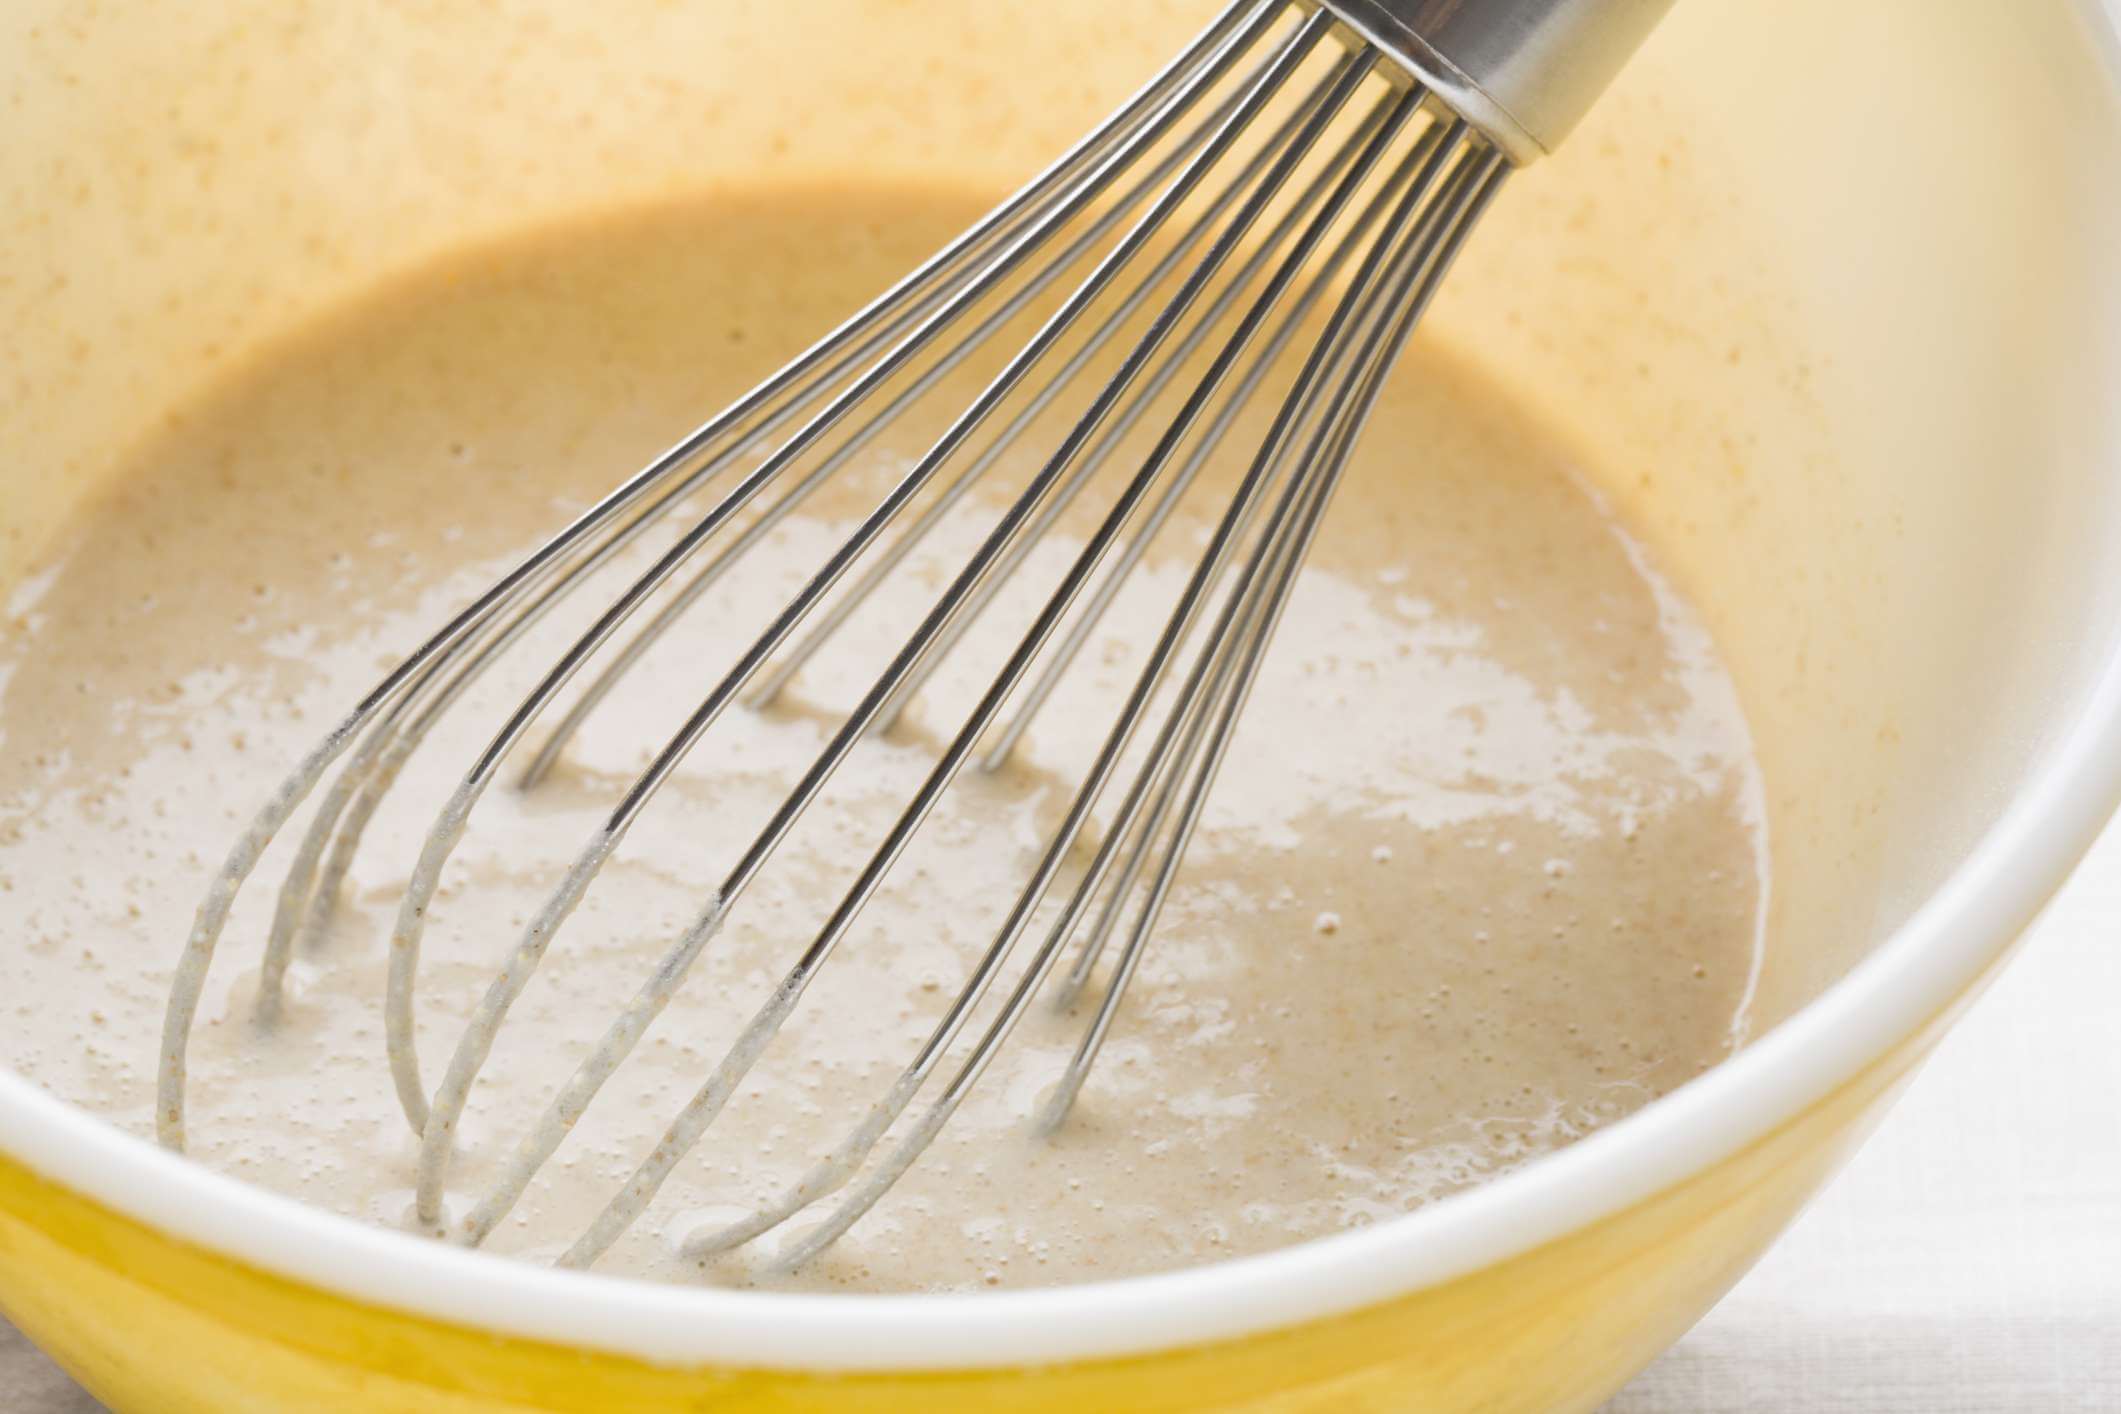 A whisk is used to mix a batter